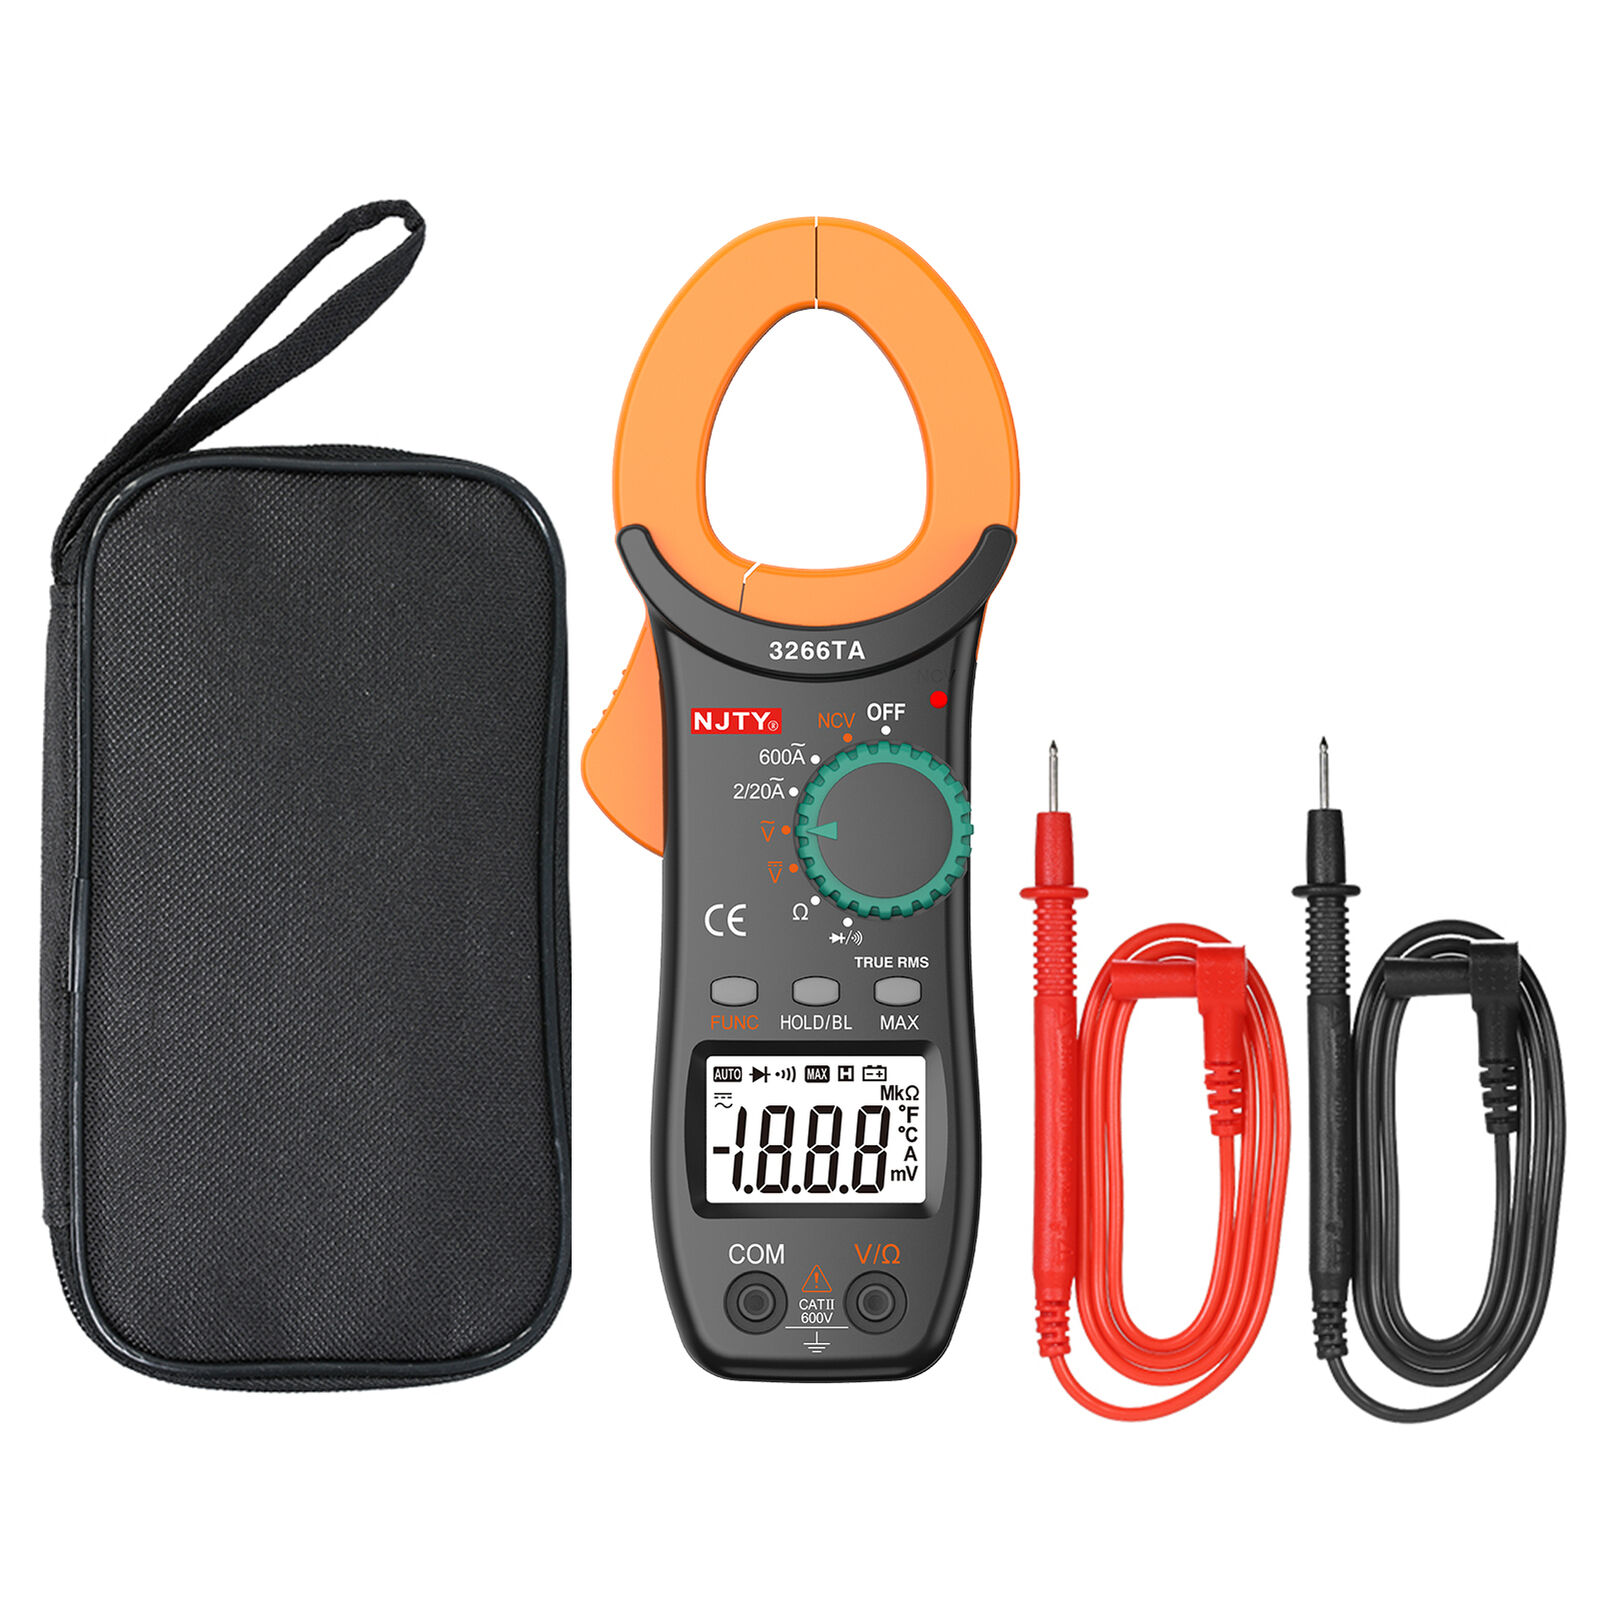 NJTY Digital Clamp Meter AC Current Portable LCD Diaplay Measuring Tool V1K4